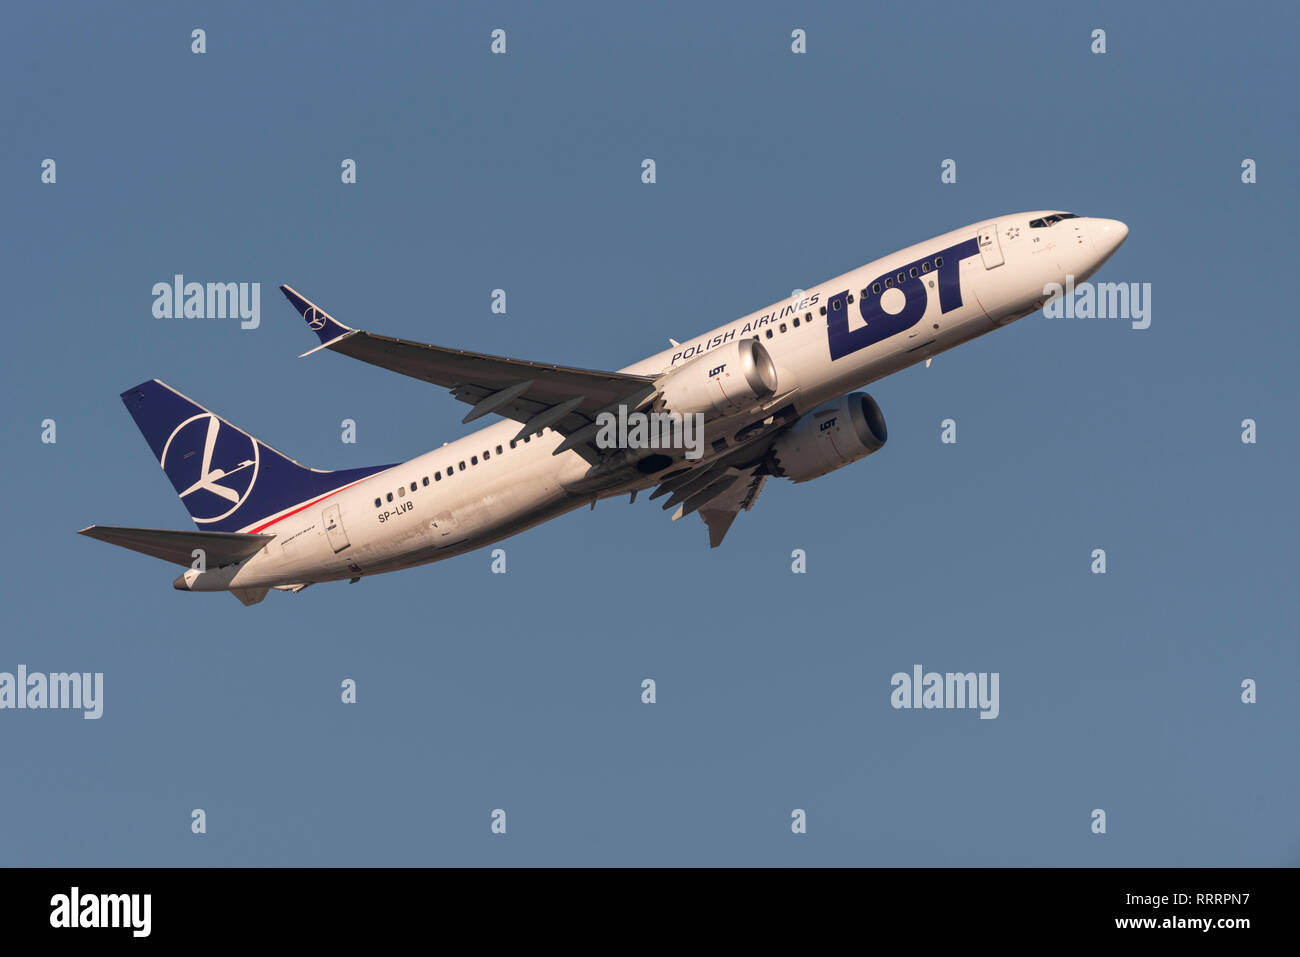 LOT Polish Airlines Boeing 737 Max 8 jet plane SP-LVB taking off from London Heathrow Airport. Troubled 737 Max design, inherited crash registration Stock Photo